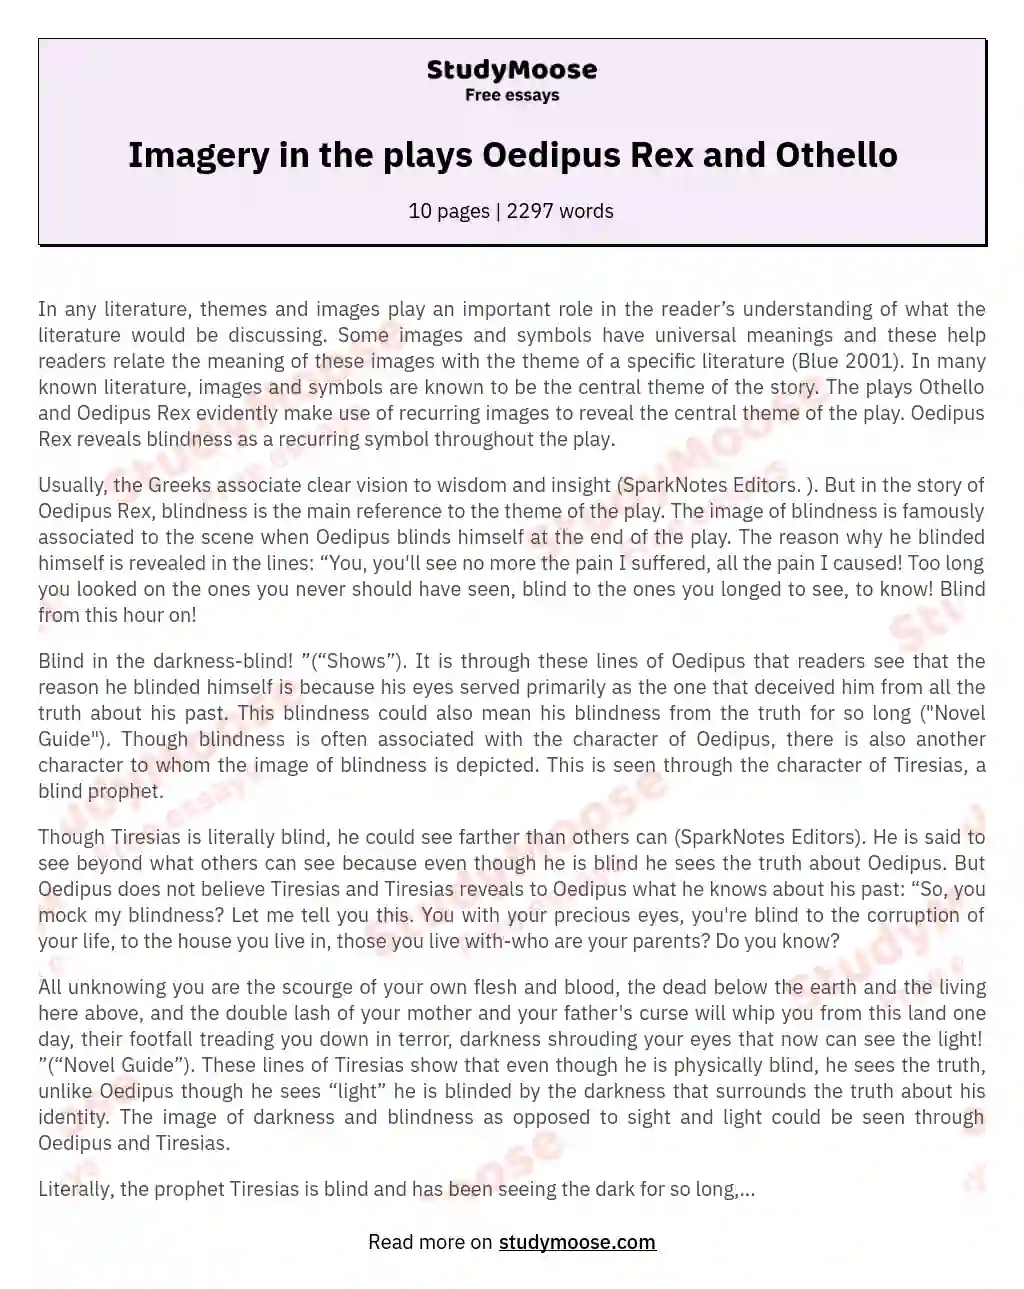 Imagery in the plays Oedipus Rex and Othello